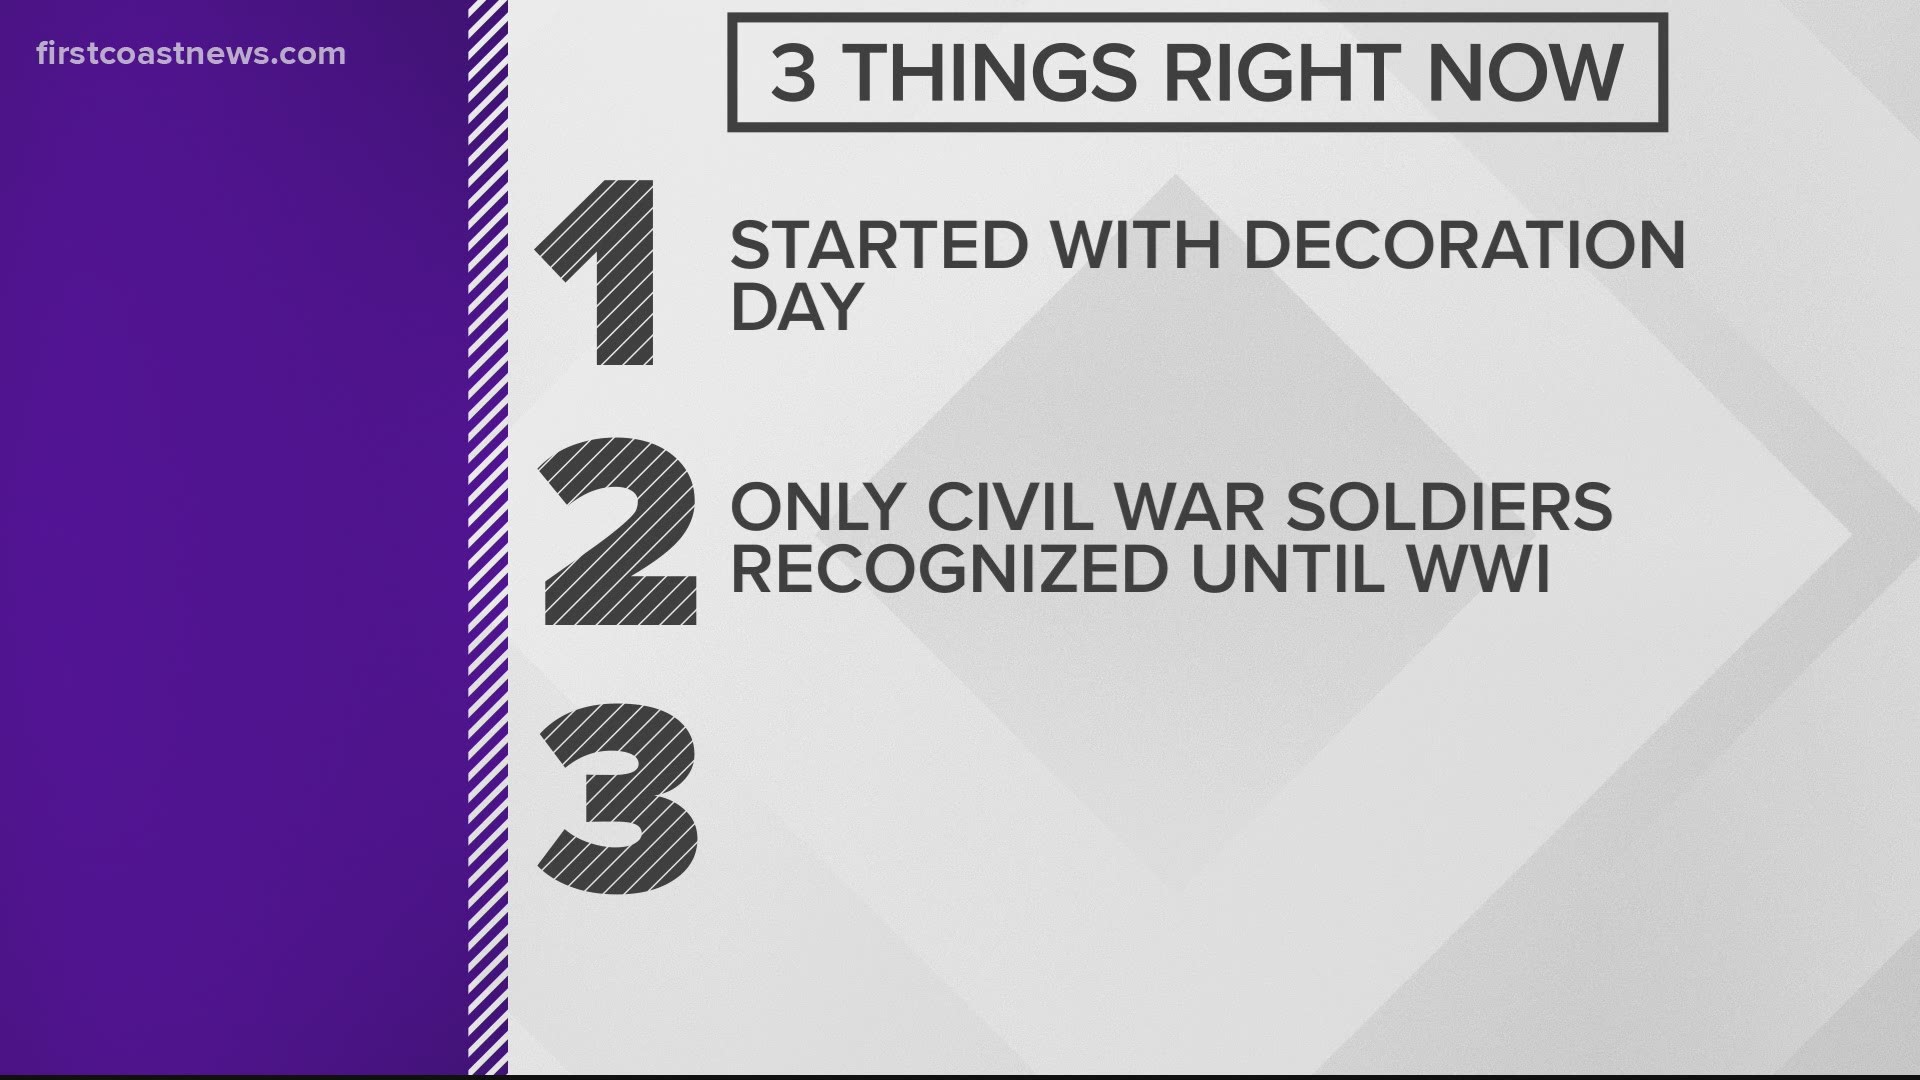 Memorial Day started out as Decoration Day following the Civil War.